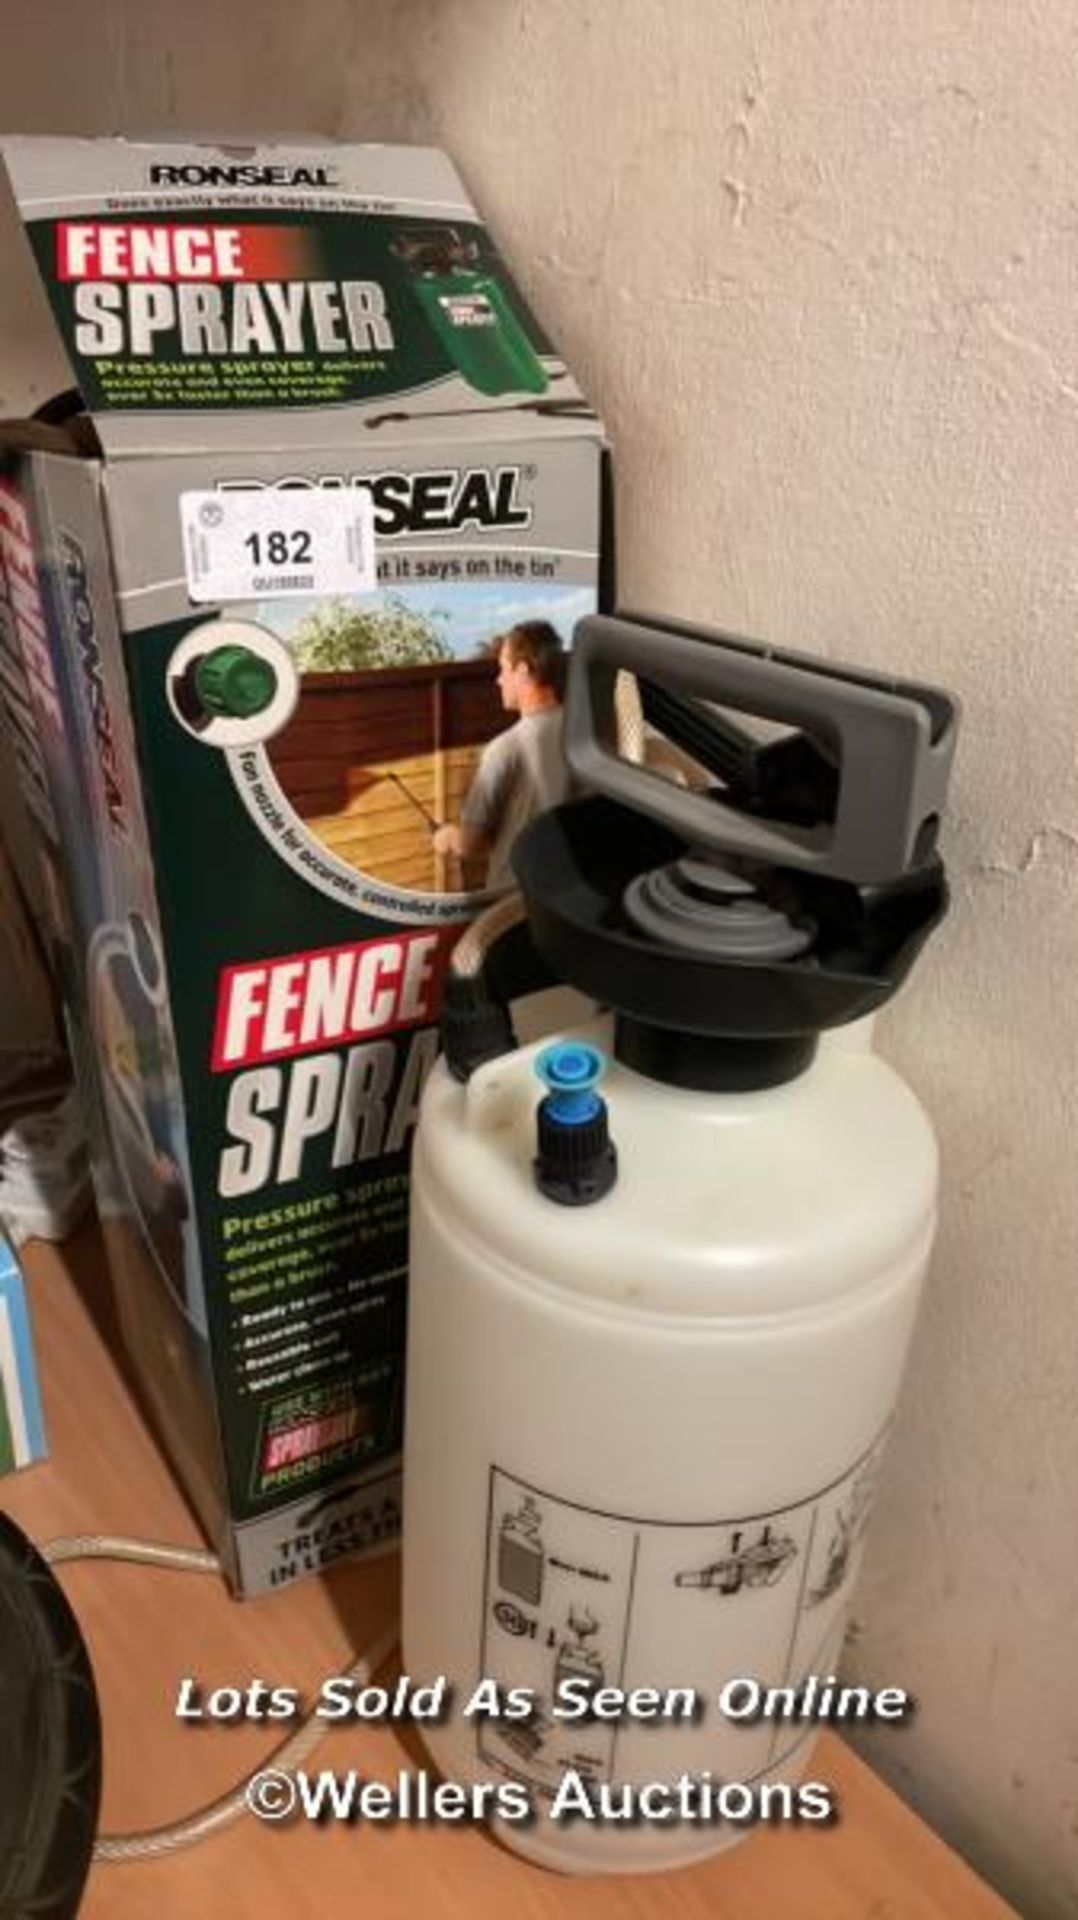 2X FENCE SPRAYERS, ONE IS RONSEAL / COLLECTION LOCATION: OLD WOKING DISTRICT RECREATION CLUB, 33